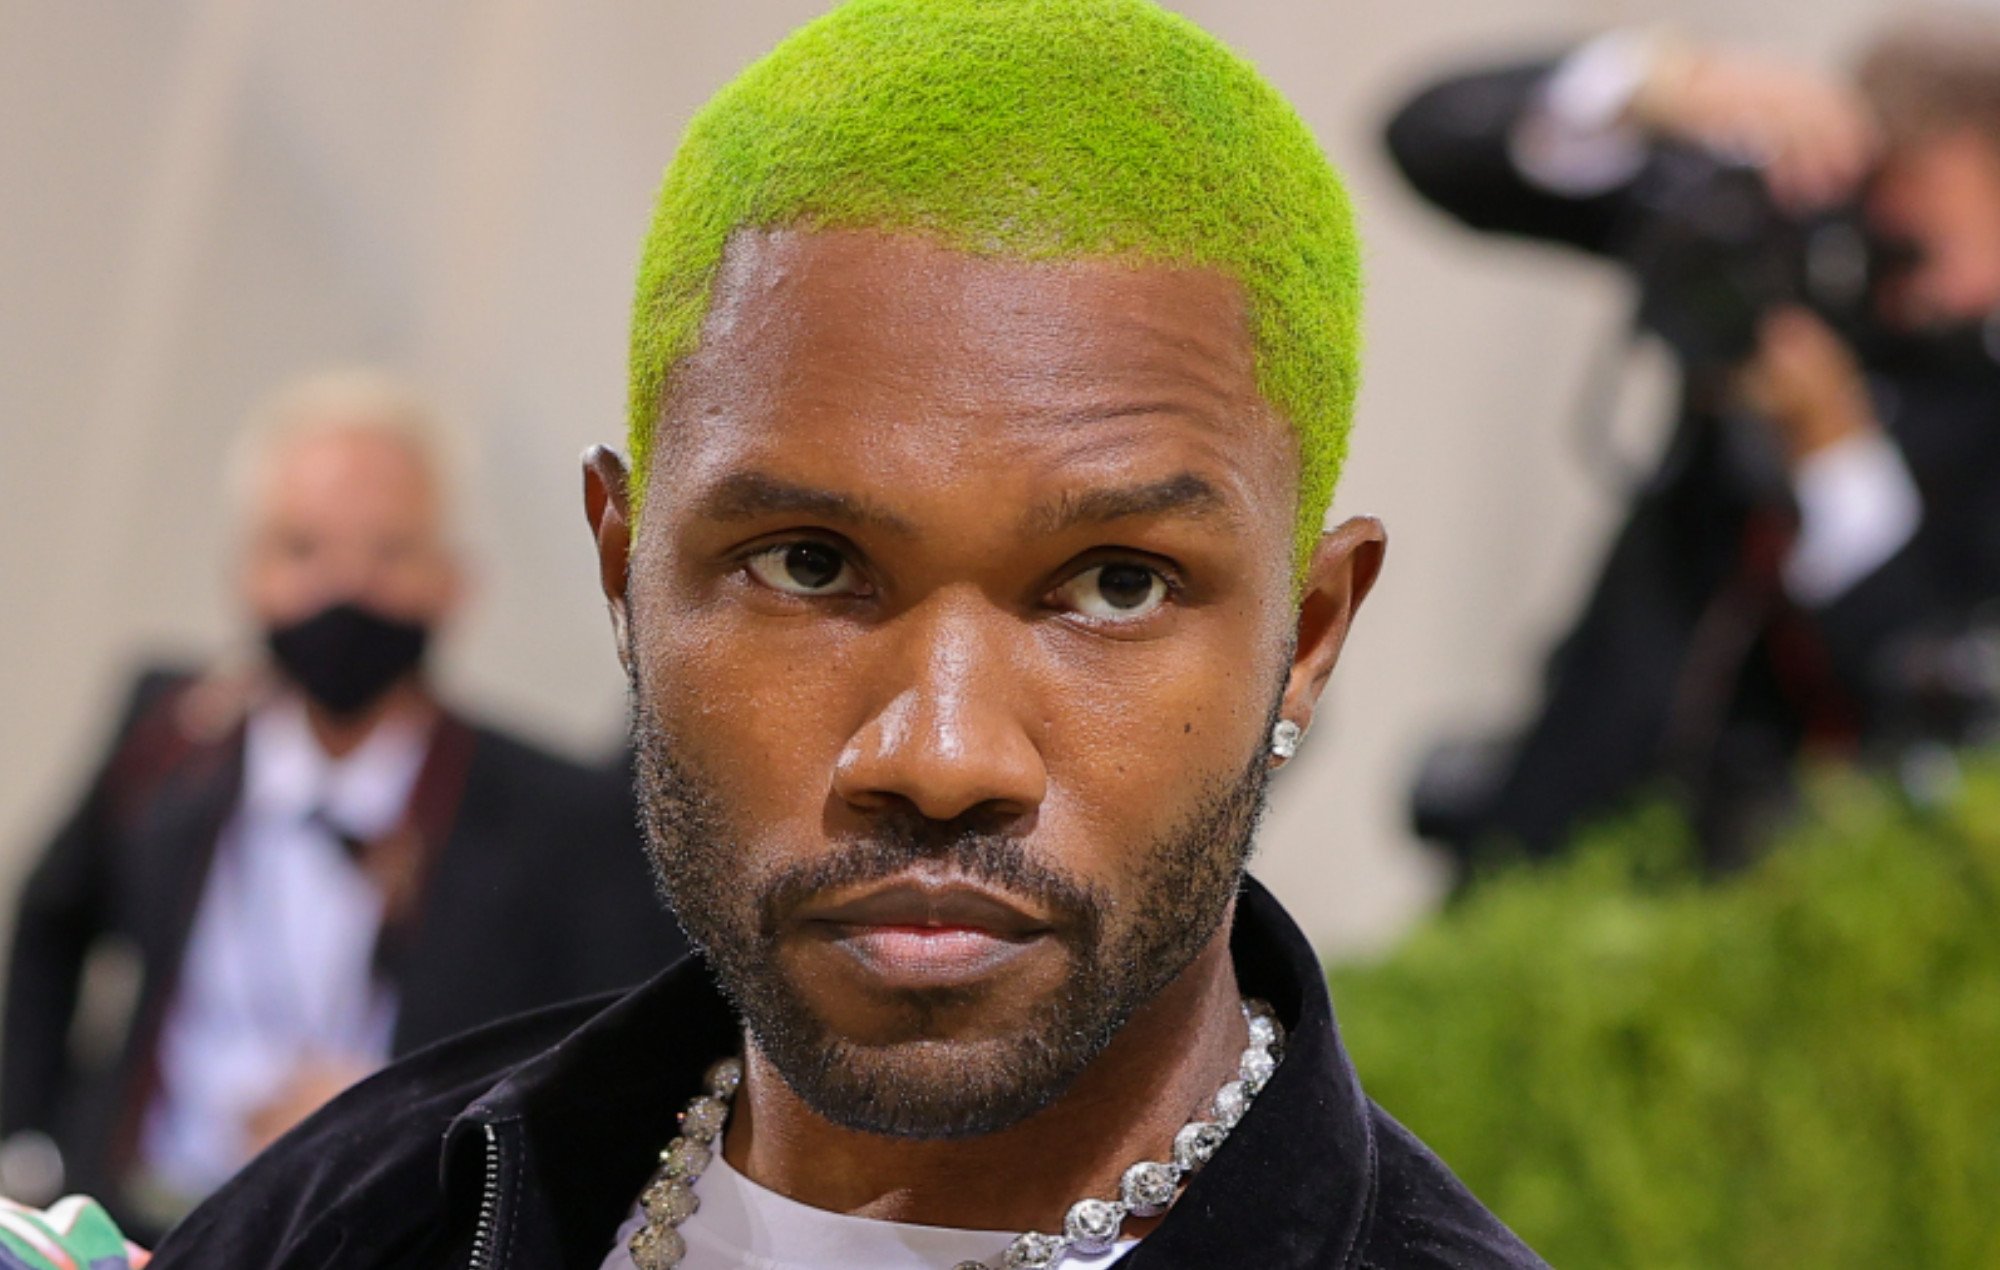 Frank Ocean appears to be back in the studio